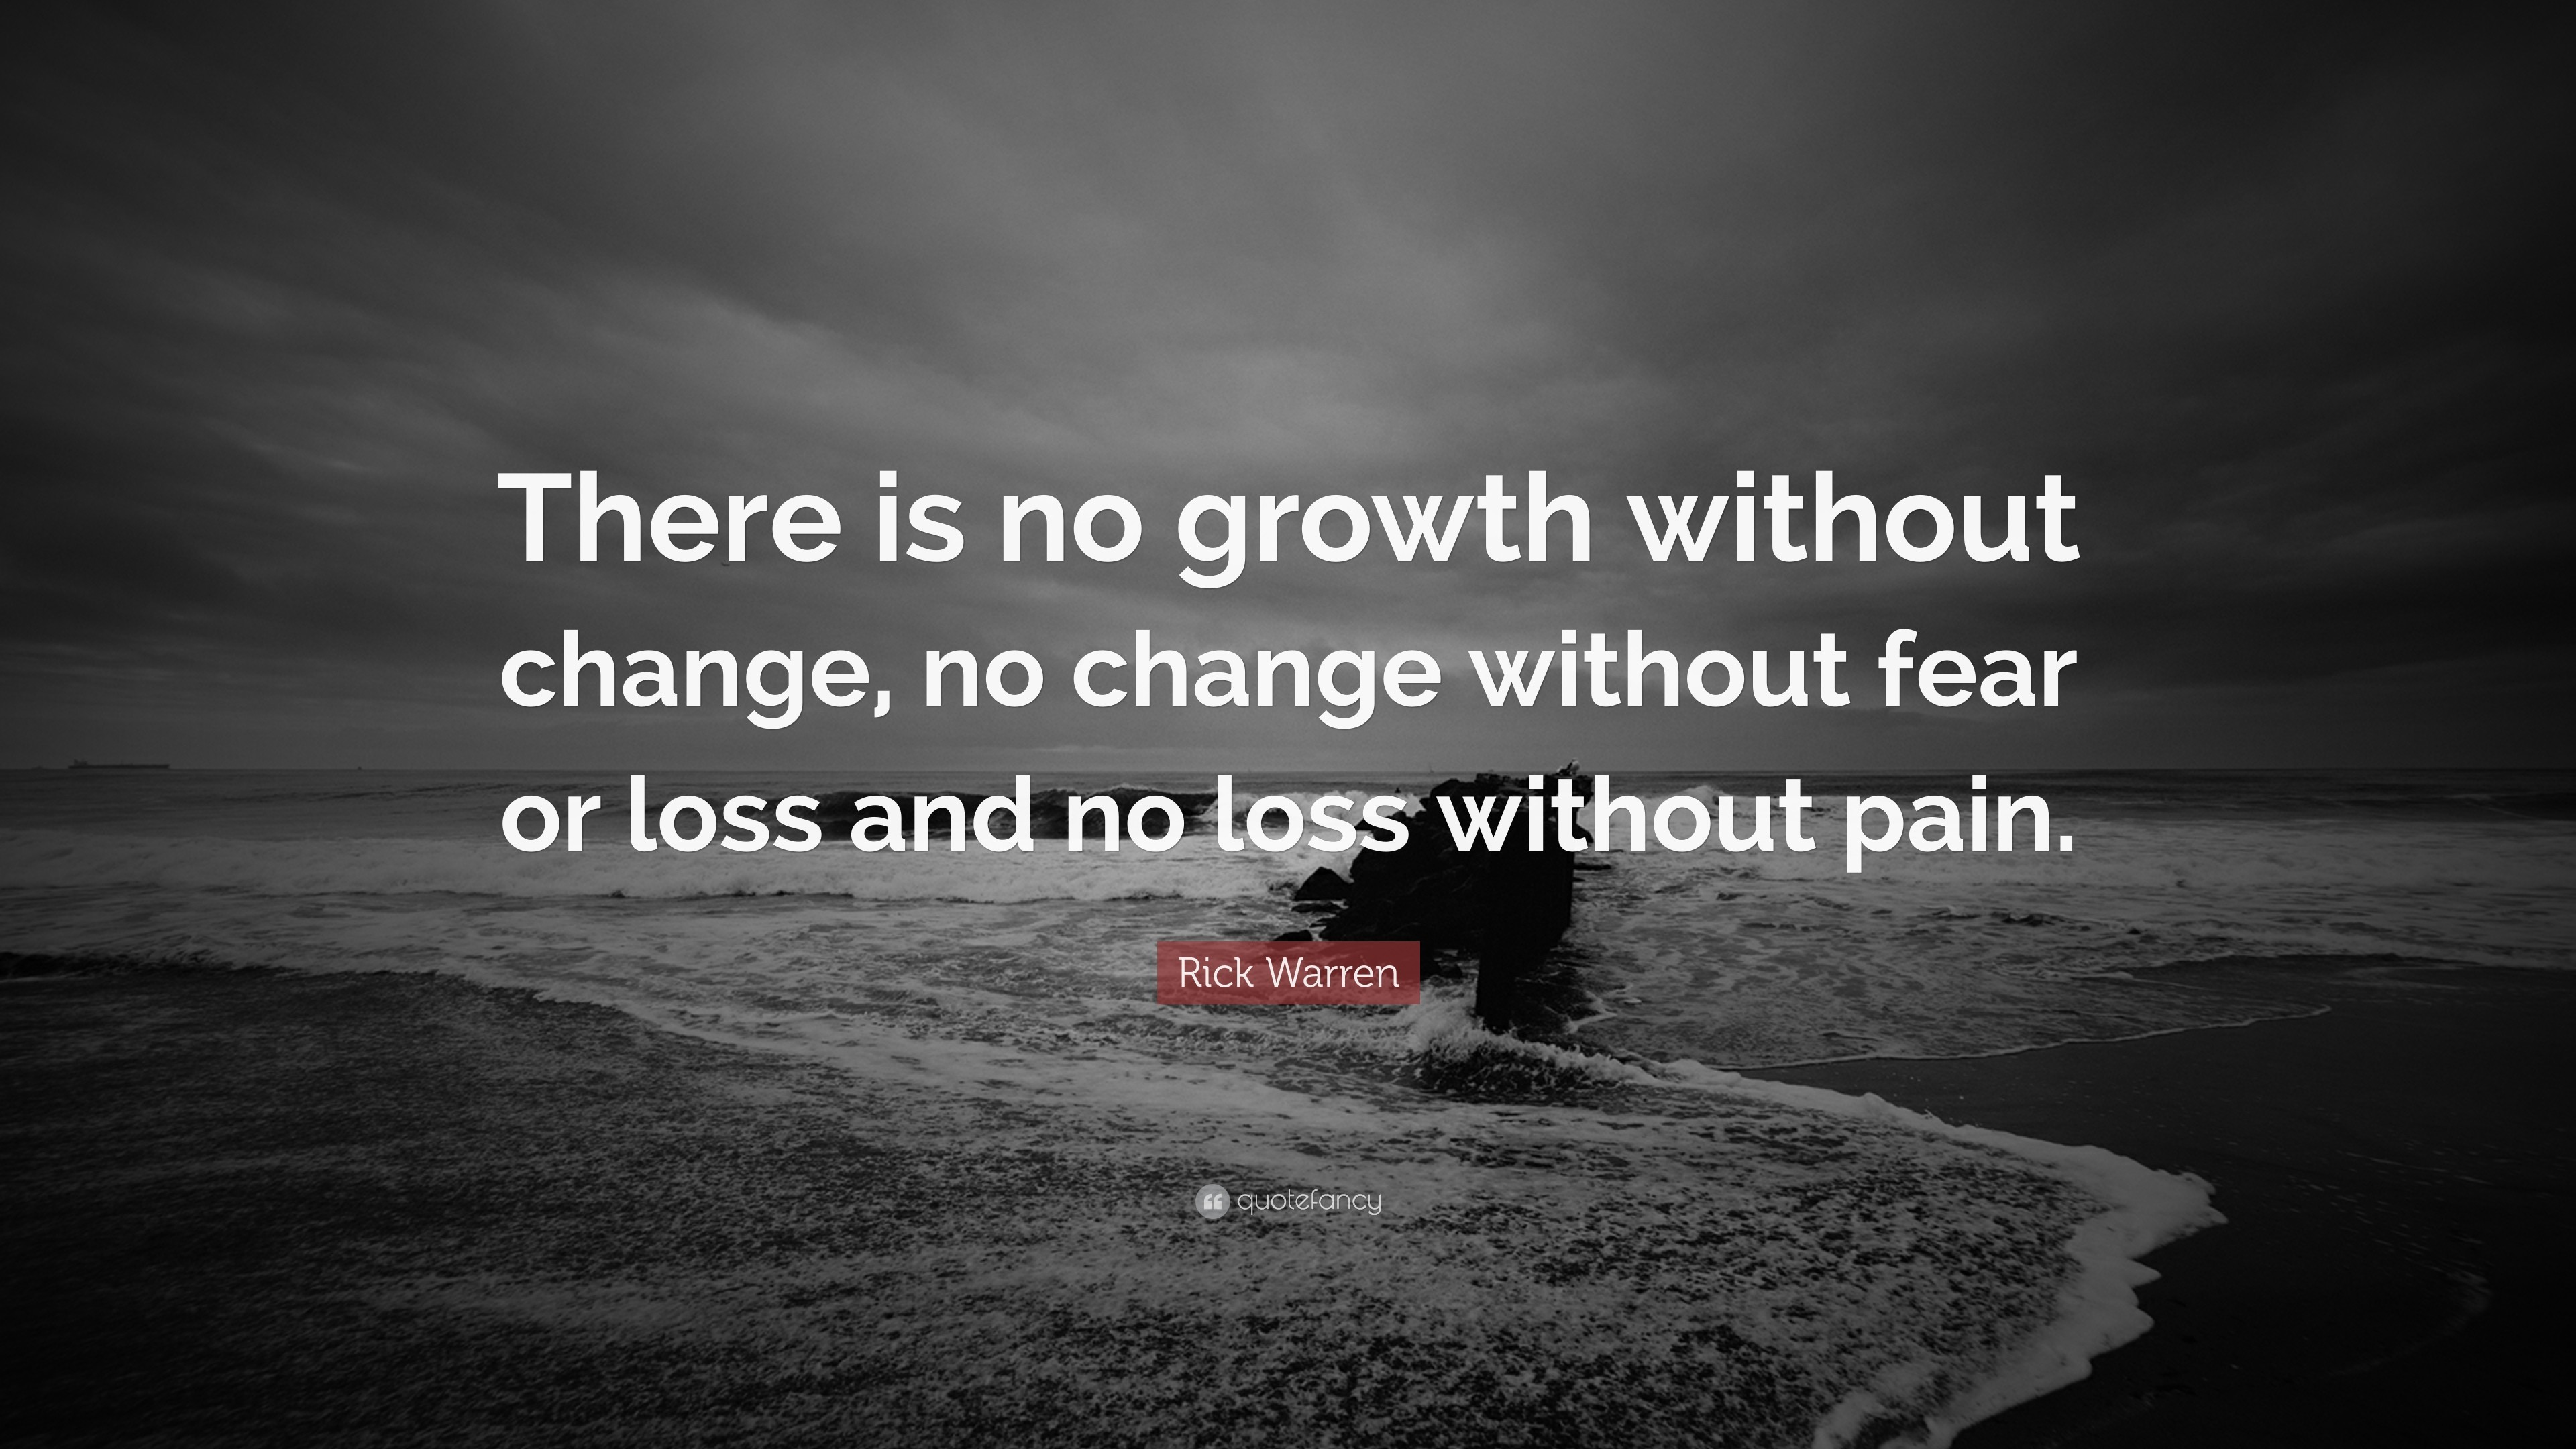 3840x2160 Rick Warren Quote: “There is no growth without change, no change without  fear